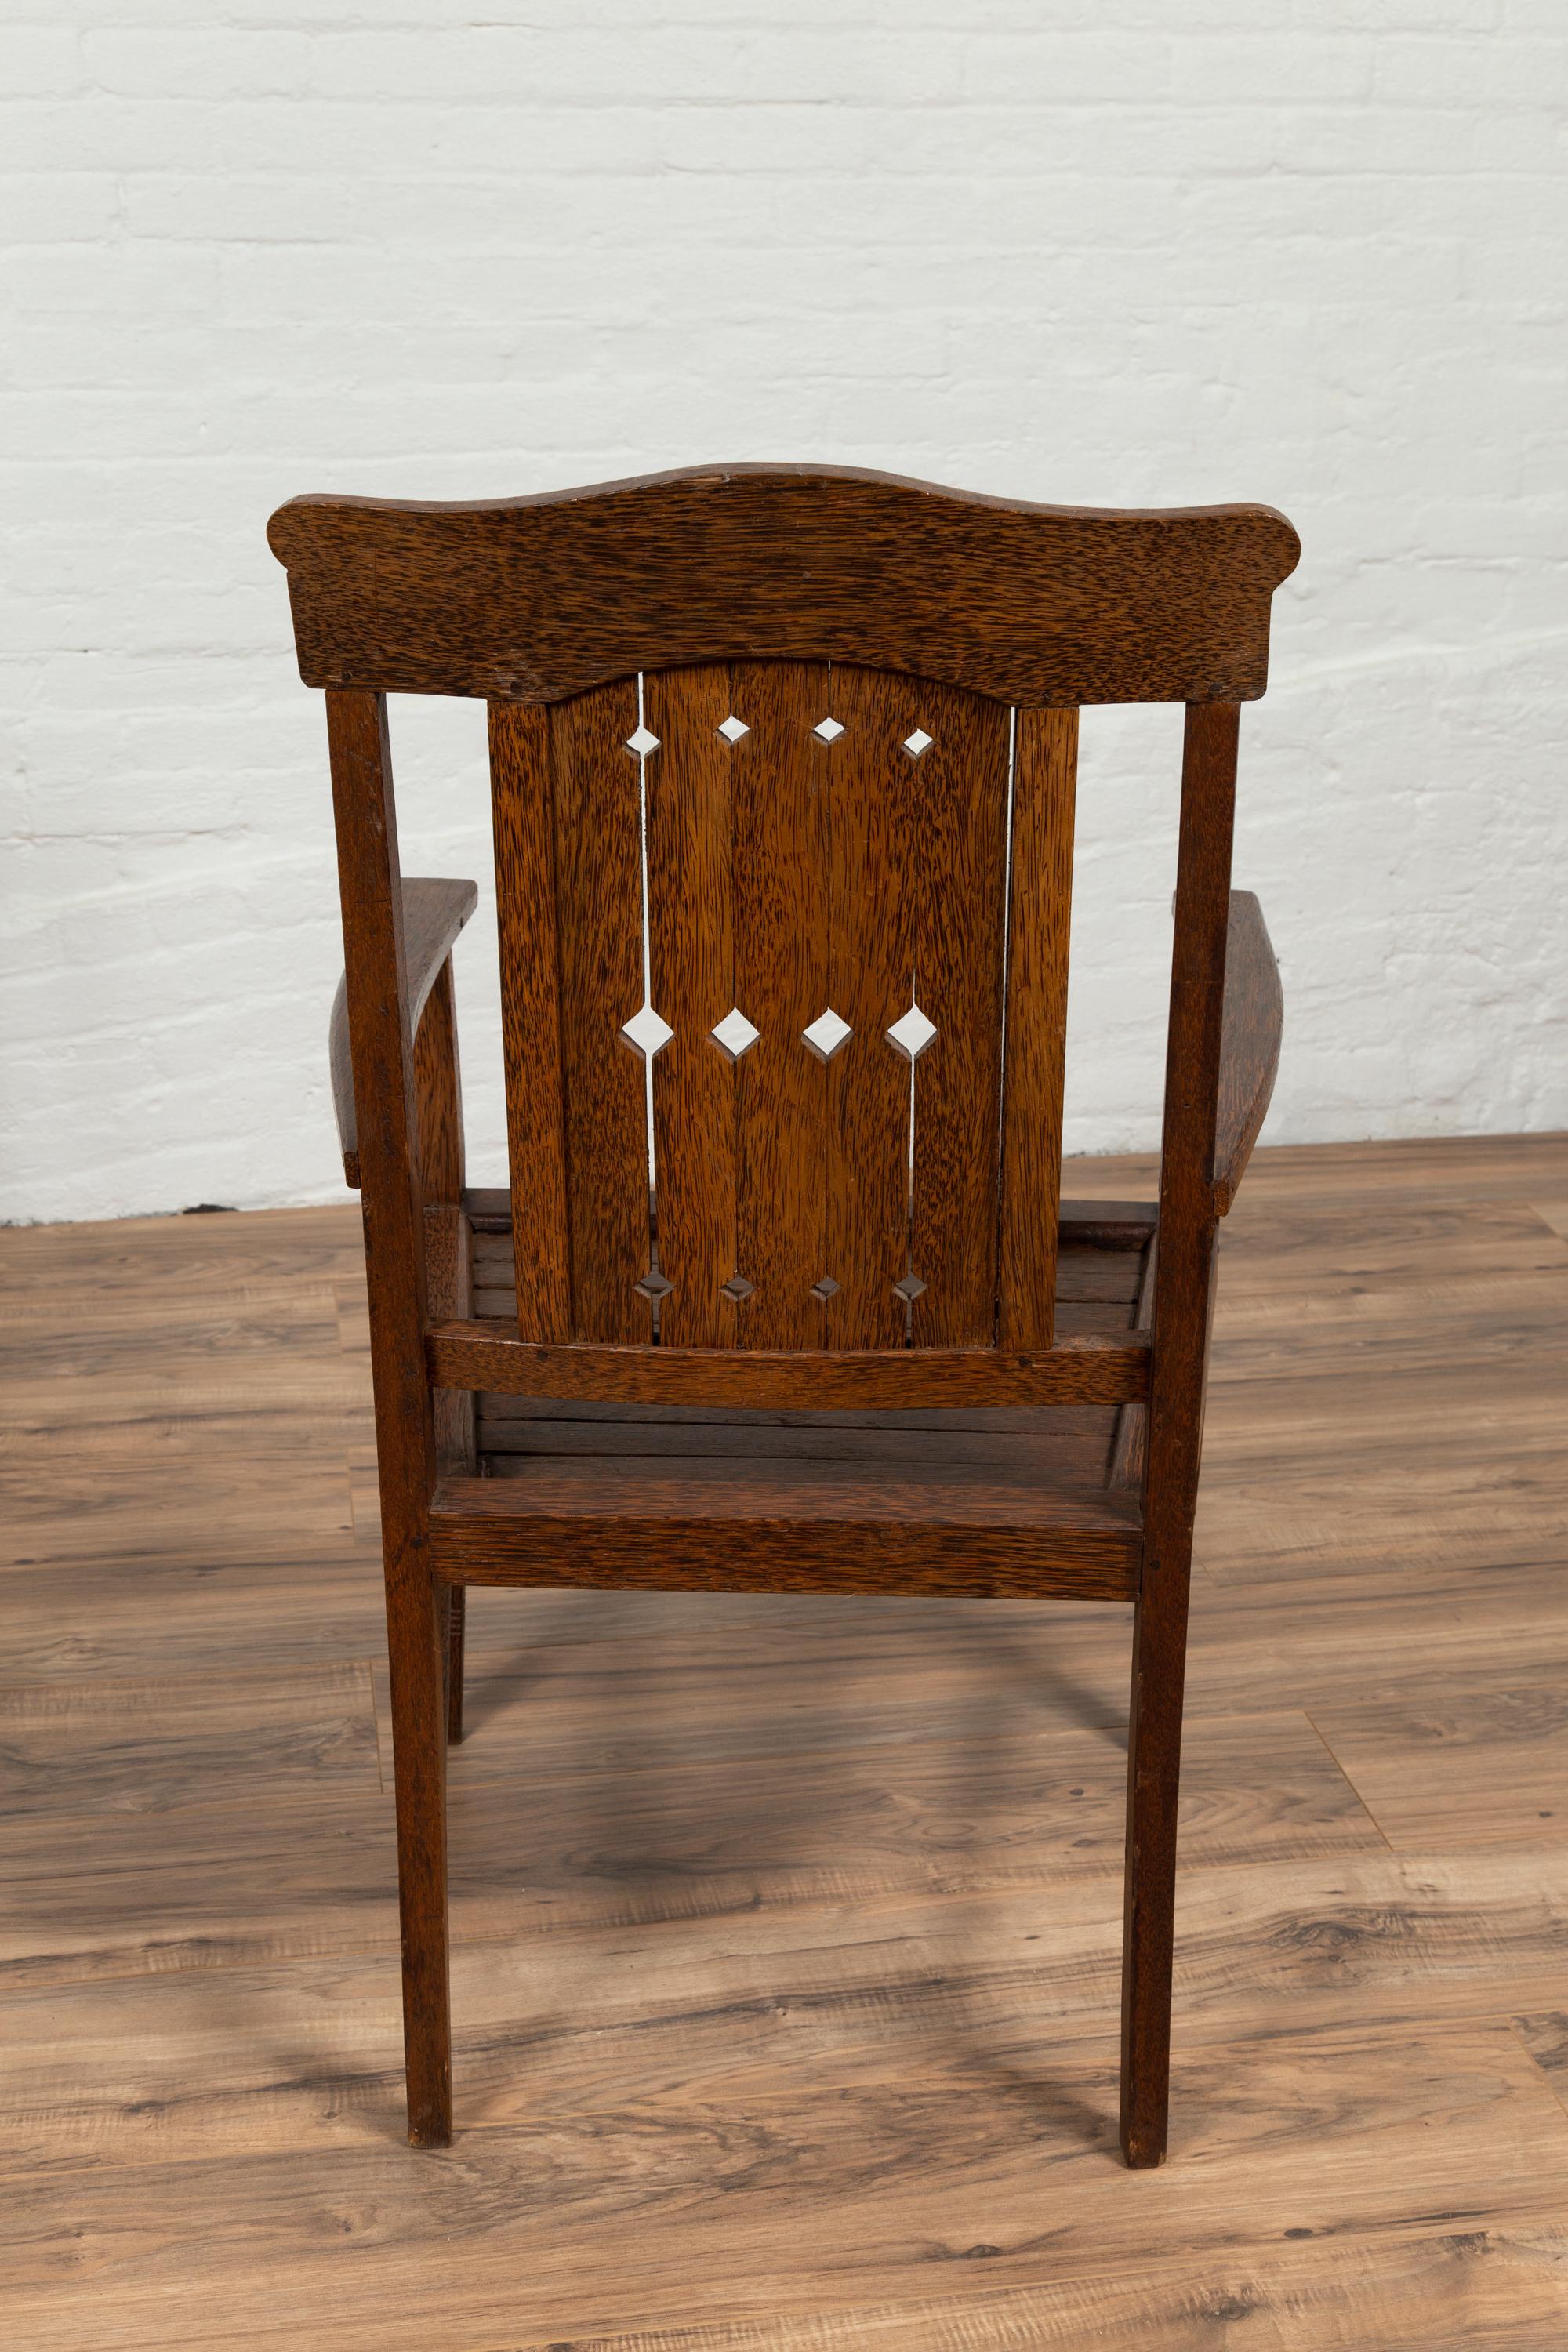 Vintage Dutch Colonial Armchair with Pierced Wooden Slats and Bonnet-Style Rail For Sale 7